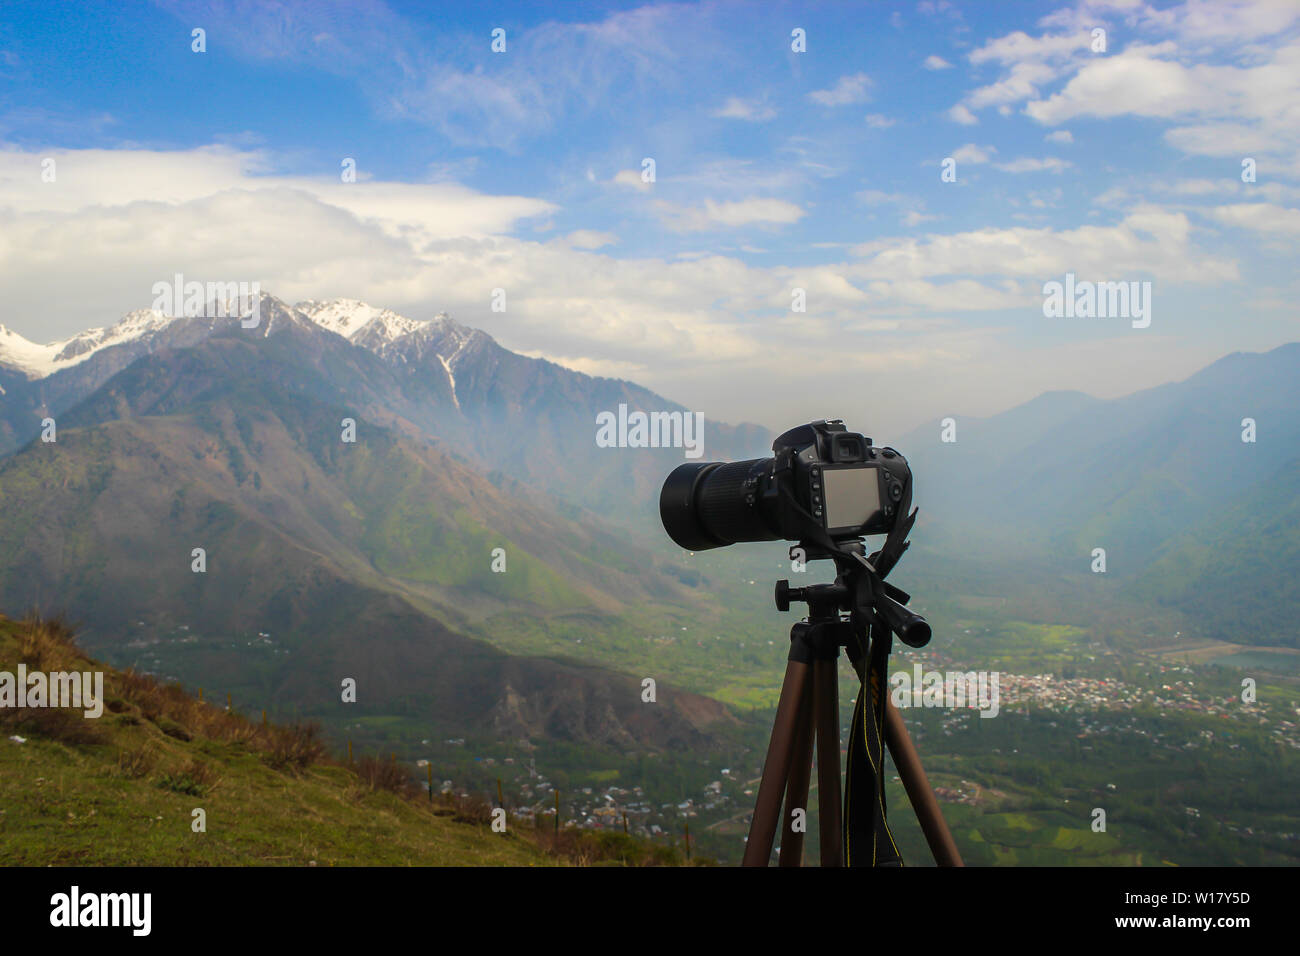 Nikon D3200 High Resolution Stock Photography and Images - Alamy